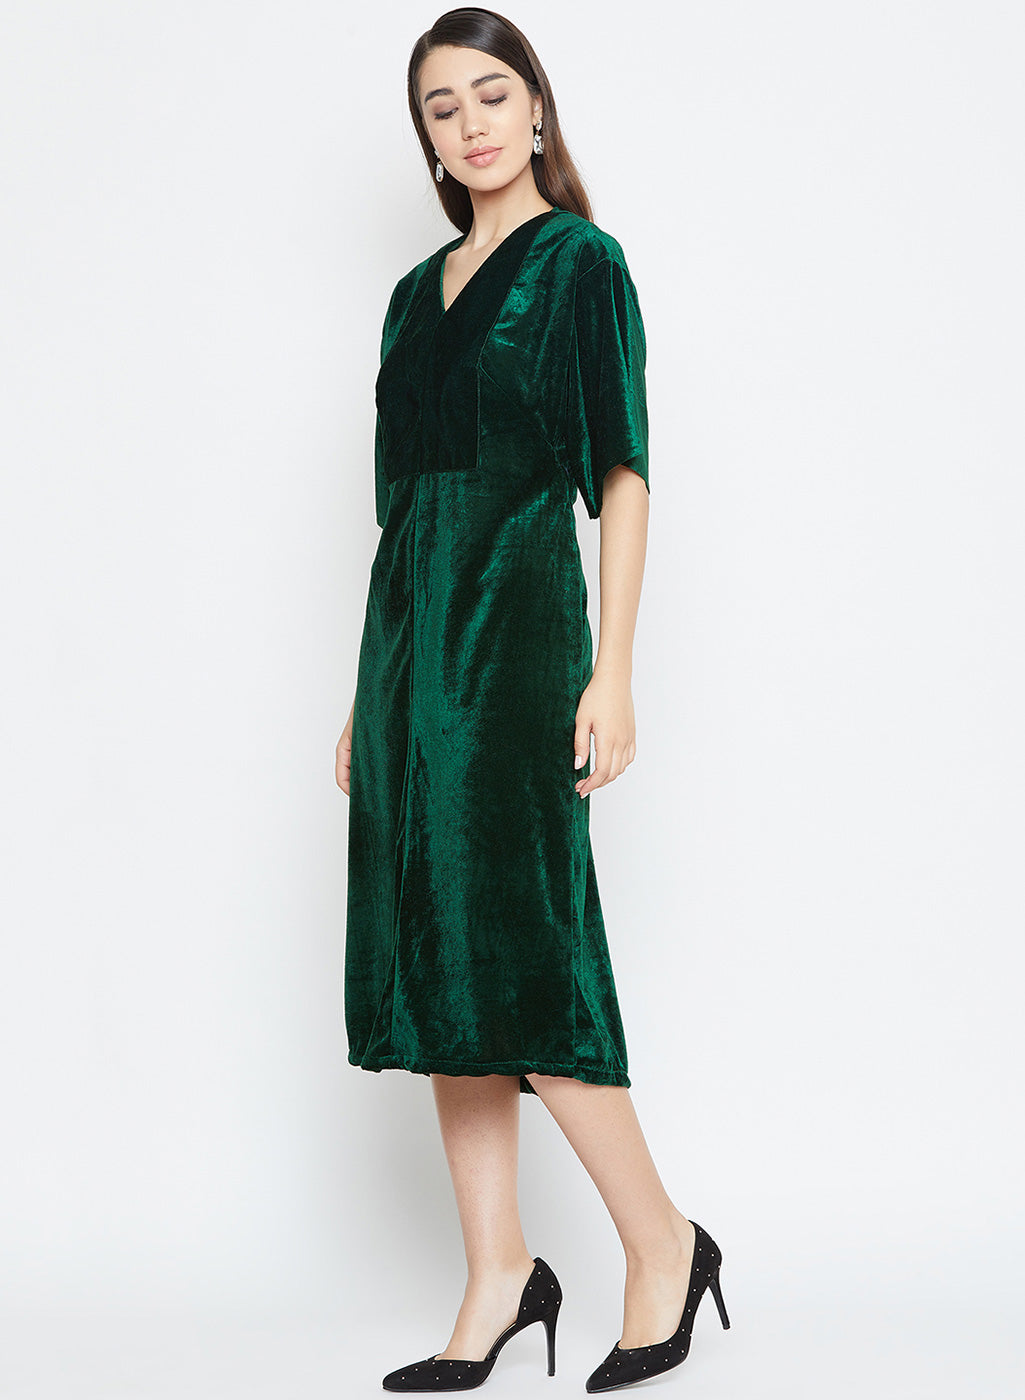 A lovely winter midi dress for women in velvet is here to steal the show